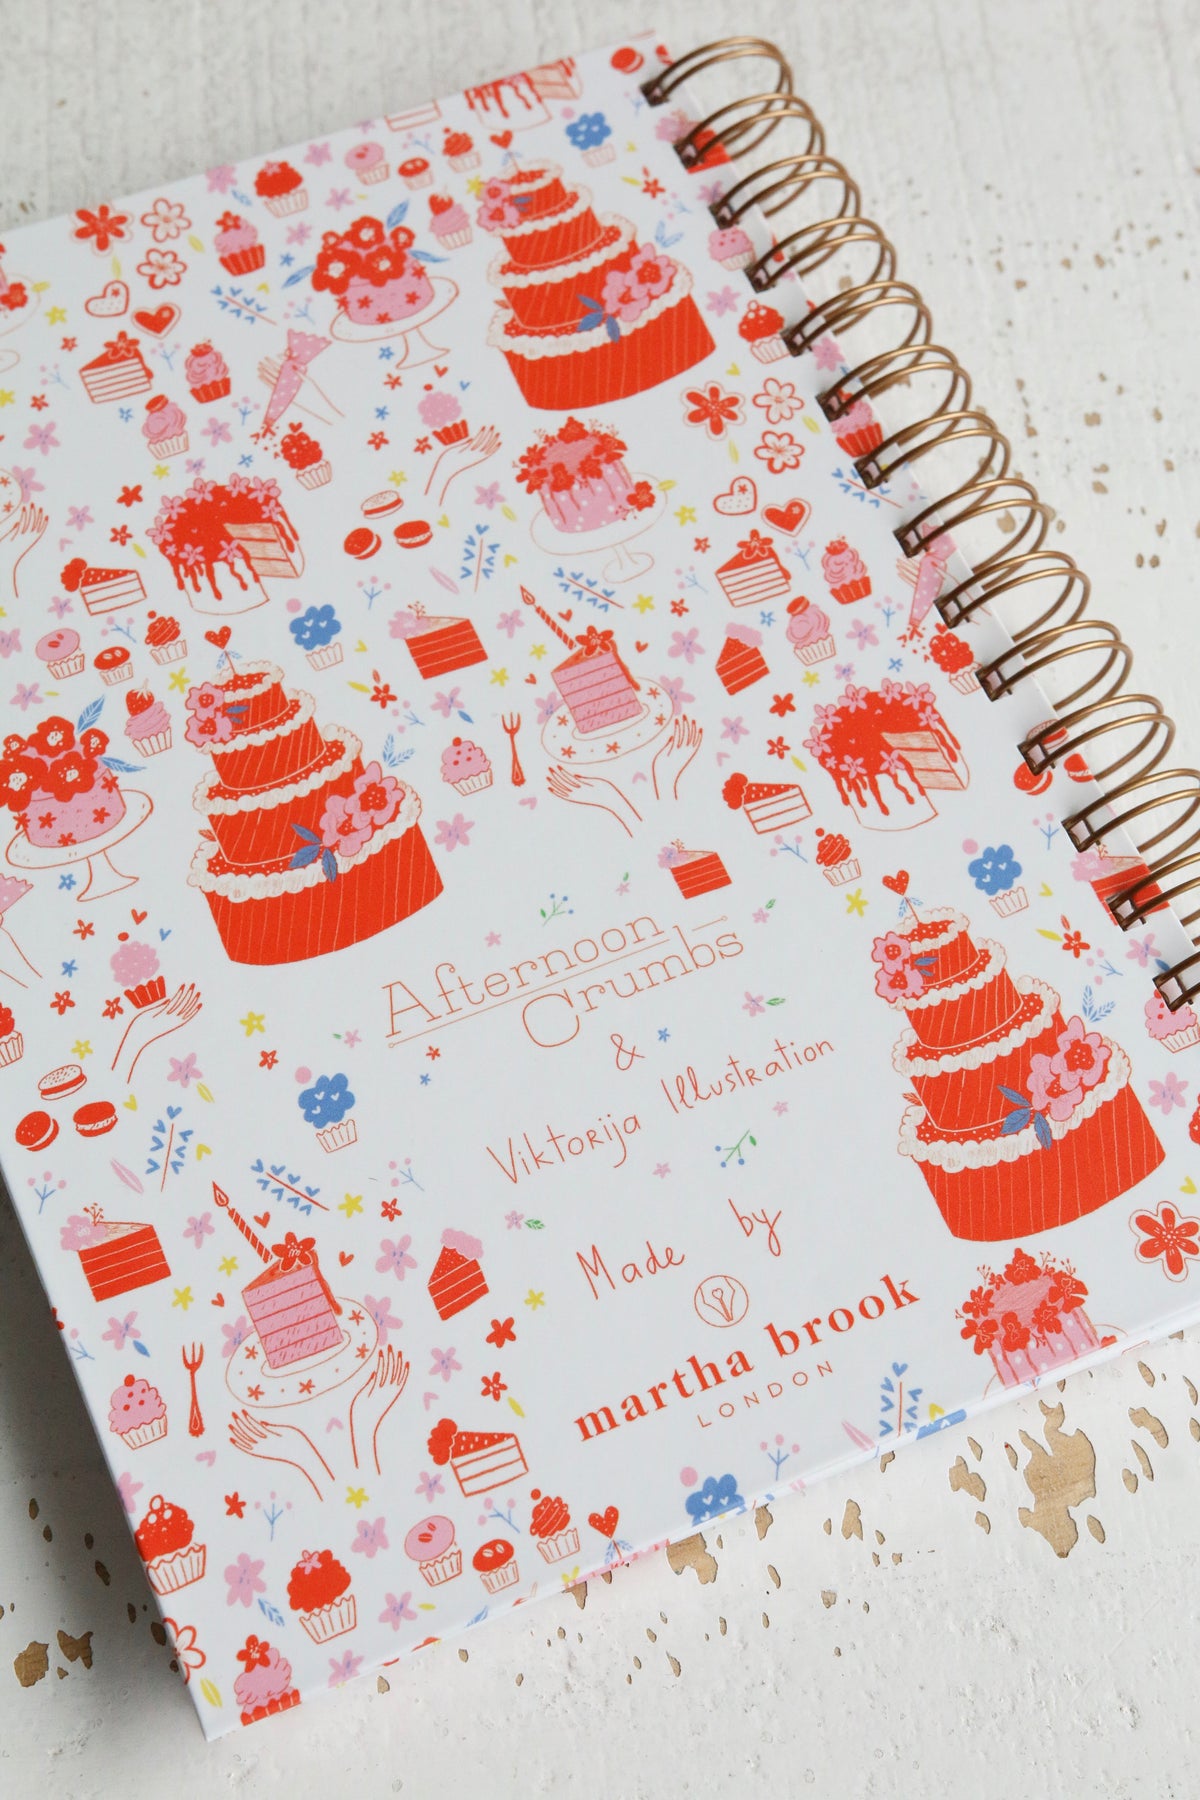 Illustrated Notebook Featuring Cake & Cupcakes back with Logos